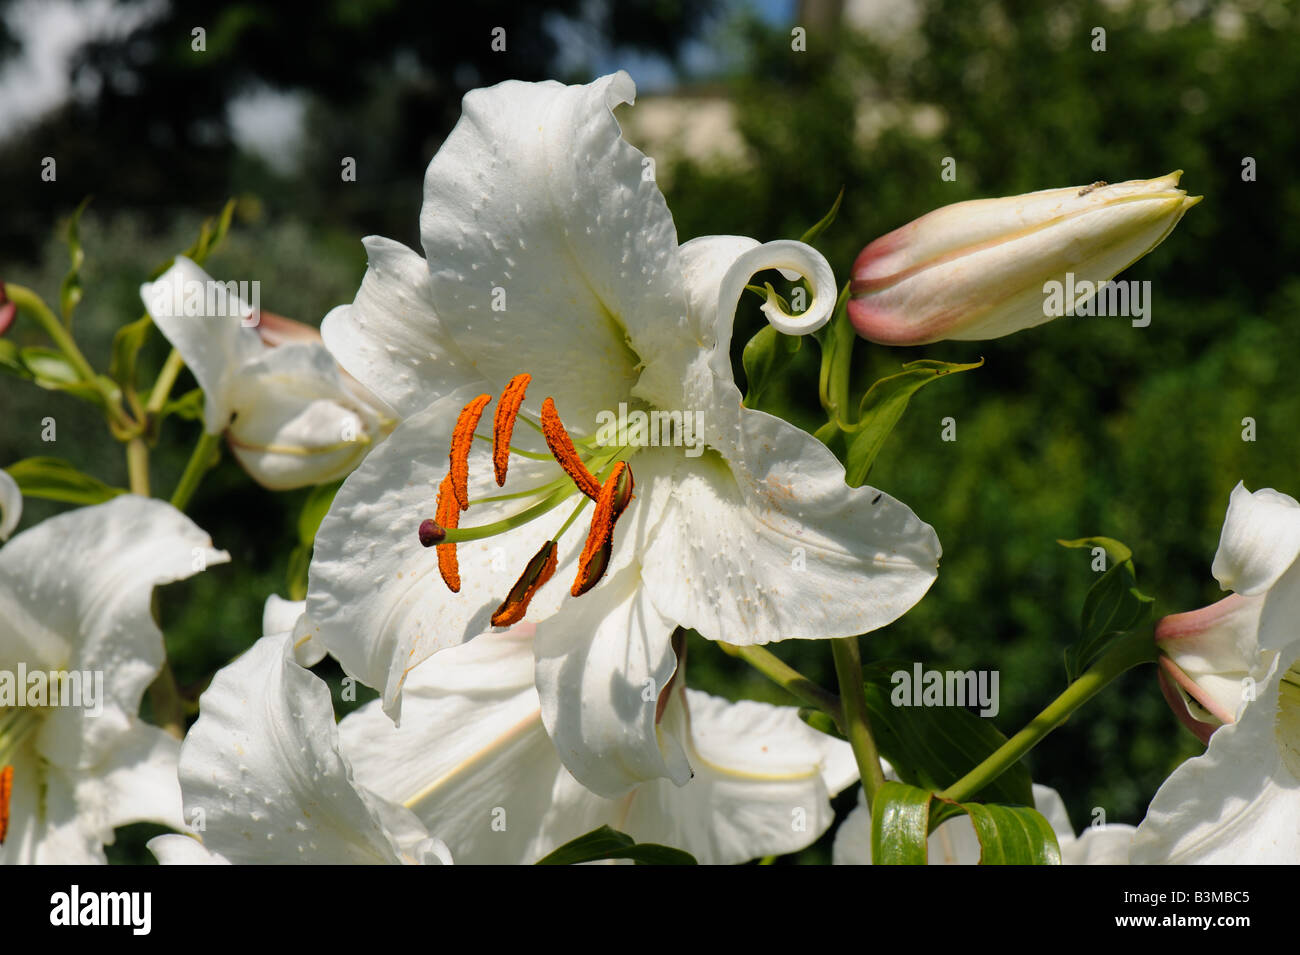 Flower and bud of a regal lily Lilium regale with orange pollen bearing anthers Stock Photo